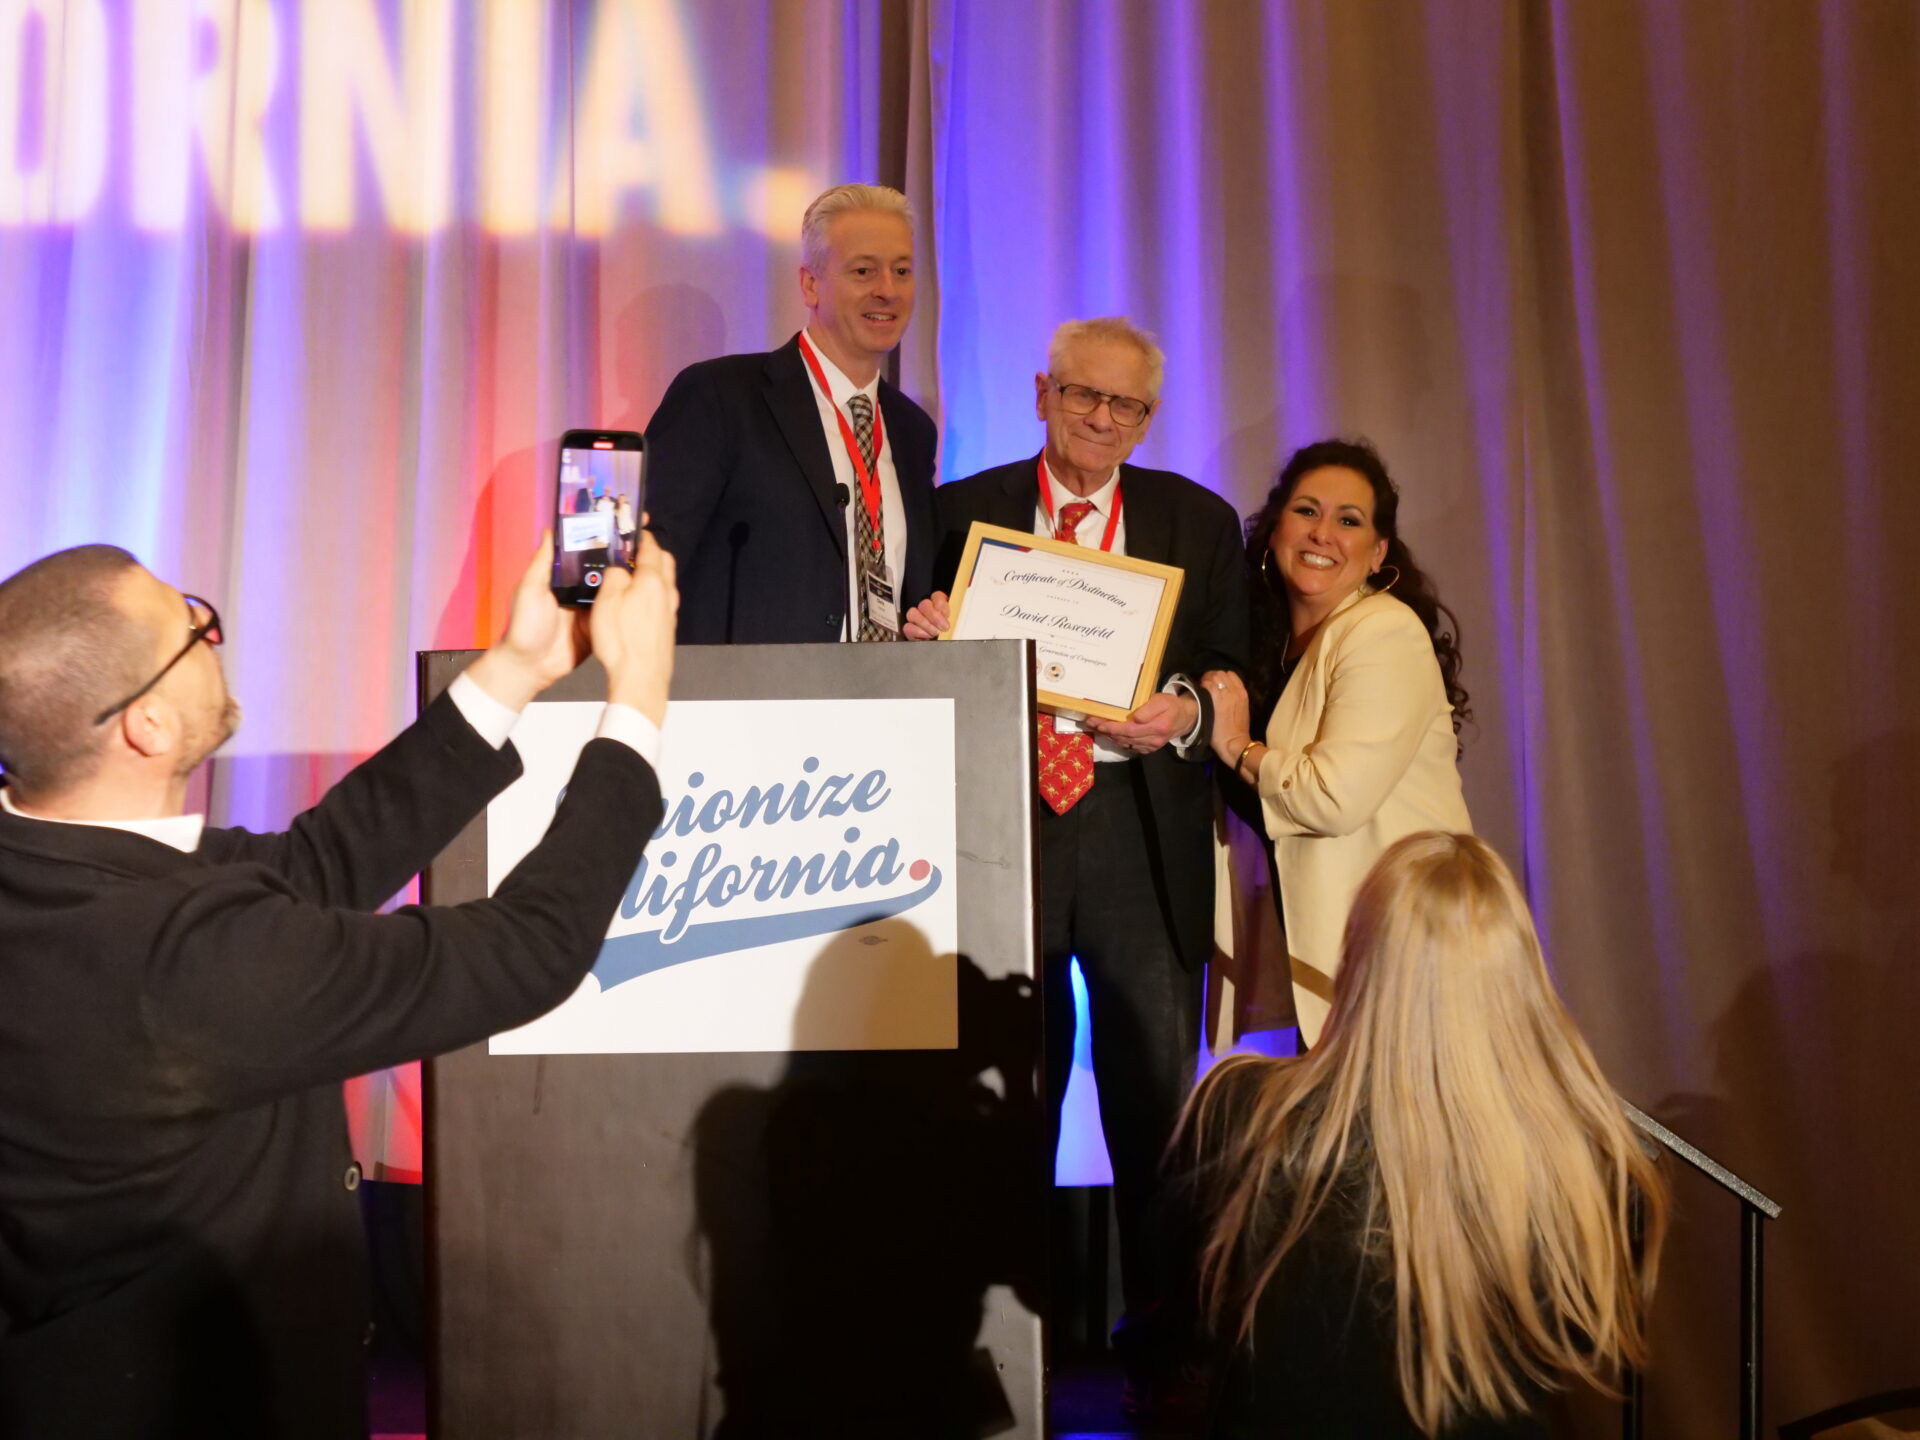 Image from the Gallery: California Joint Legislative Conference – Sacramento, CA